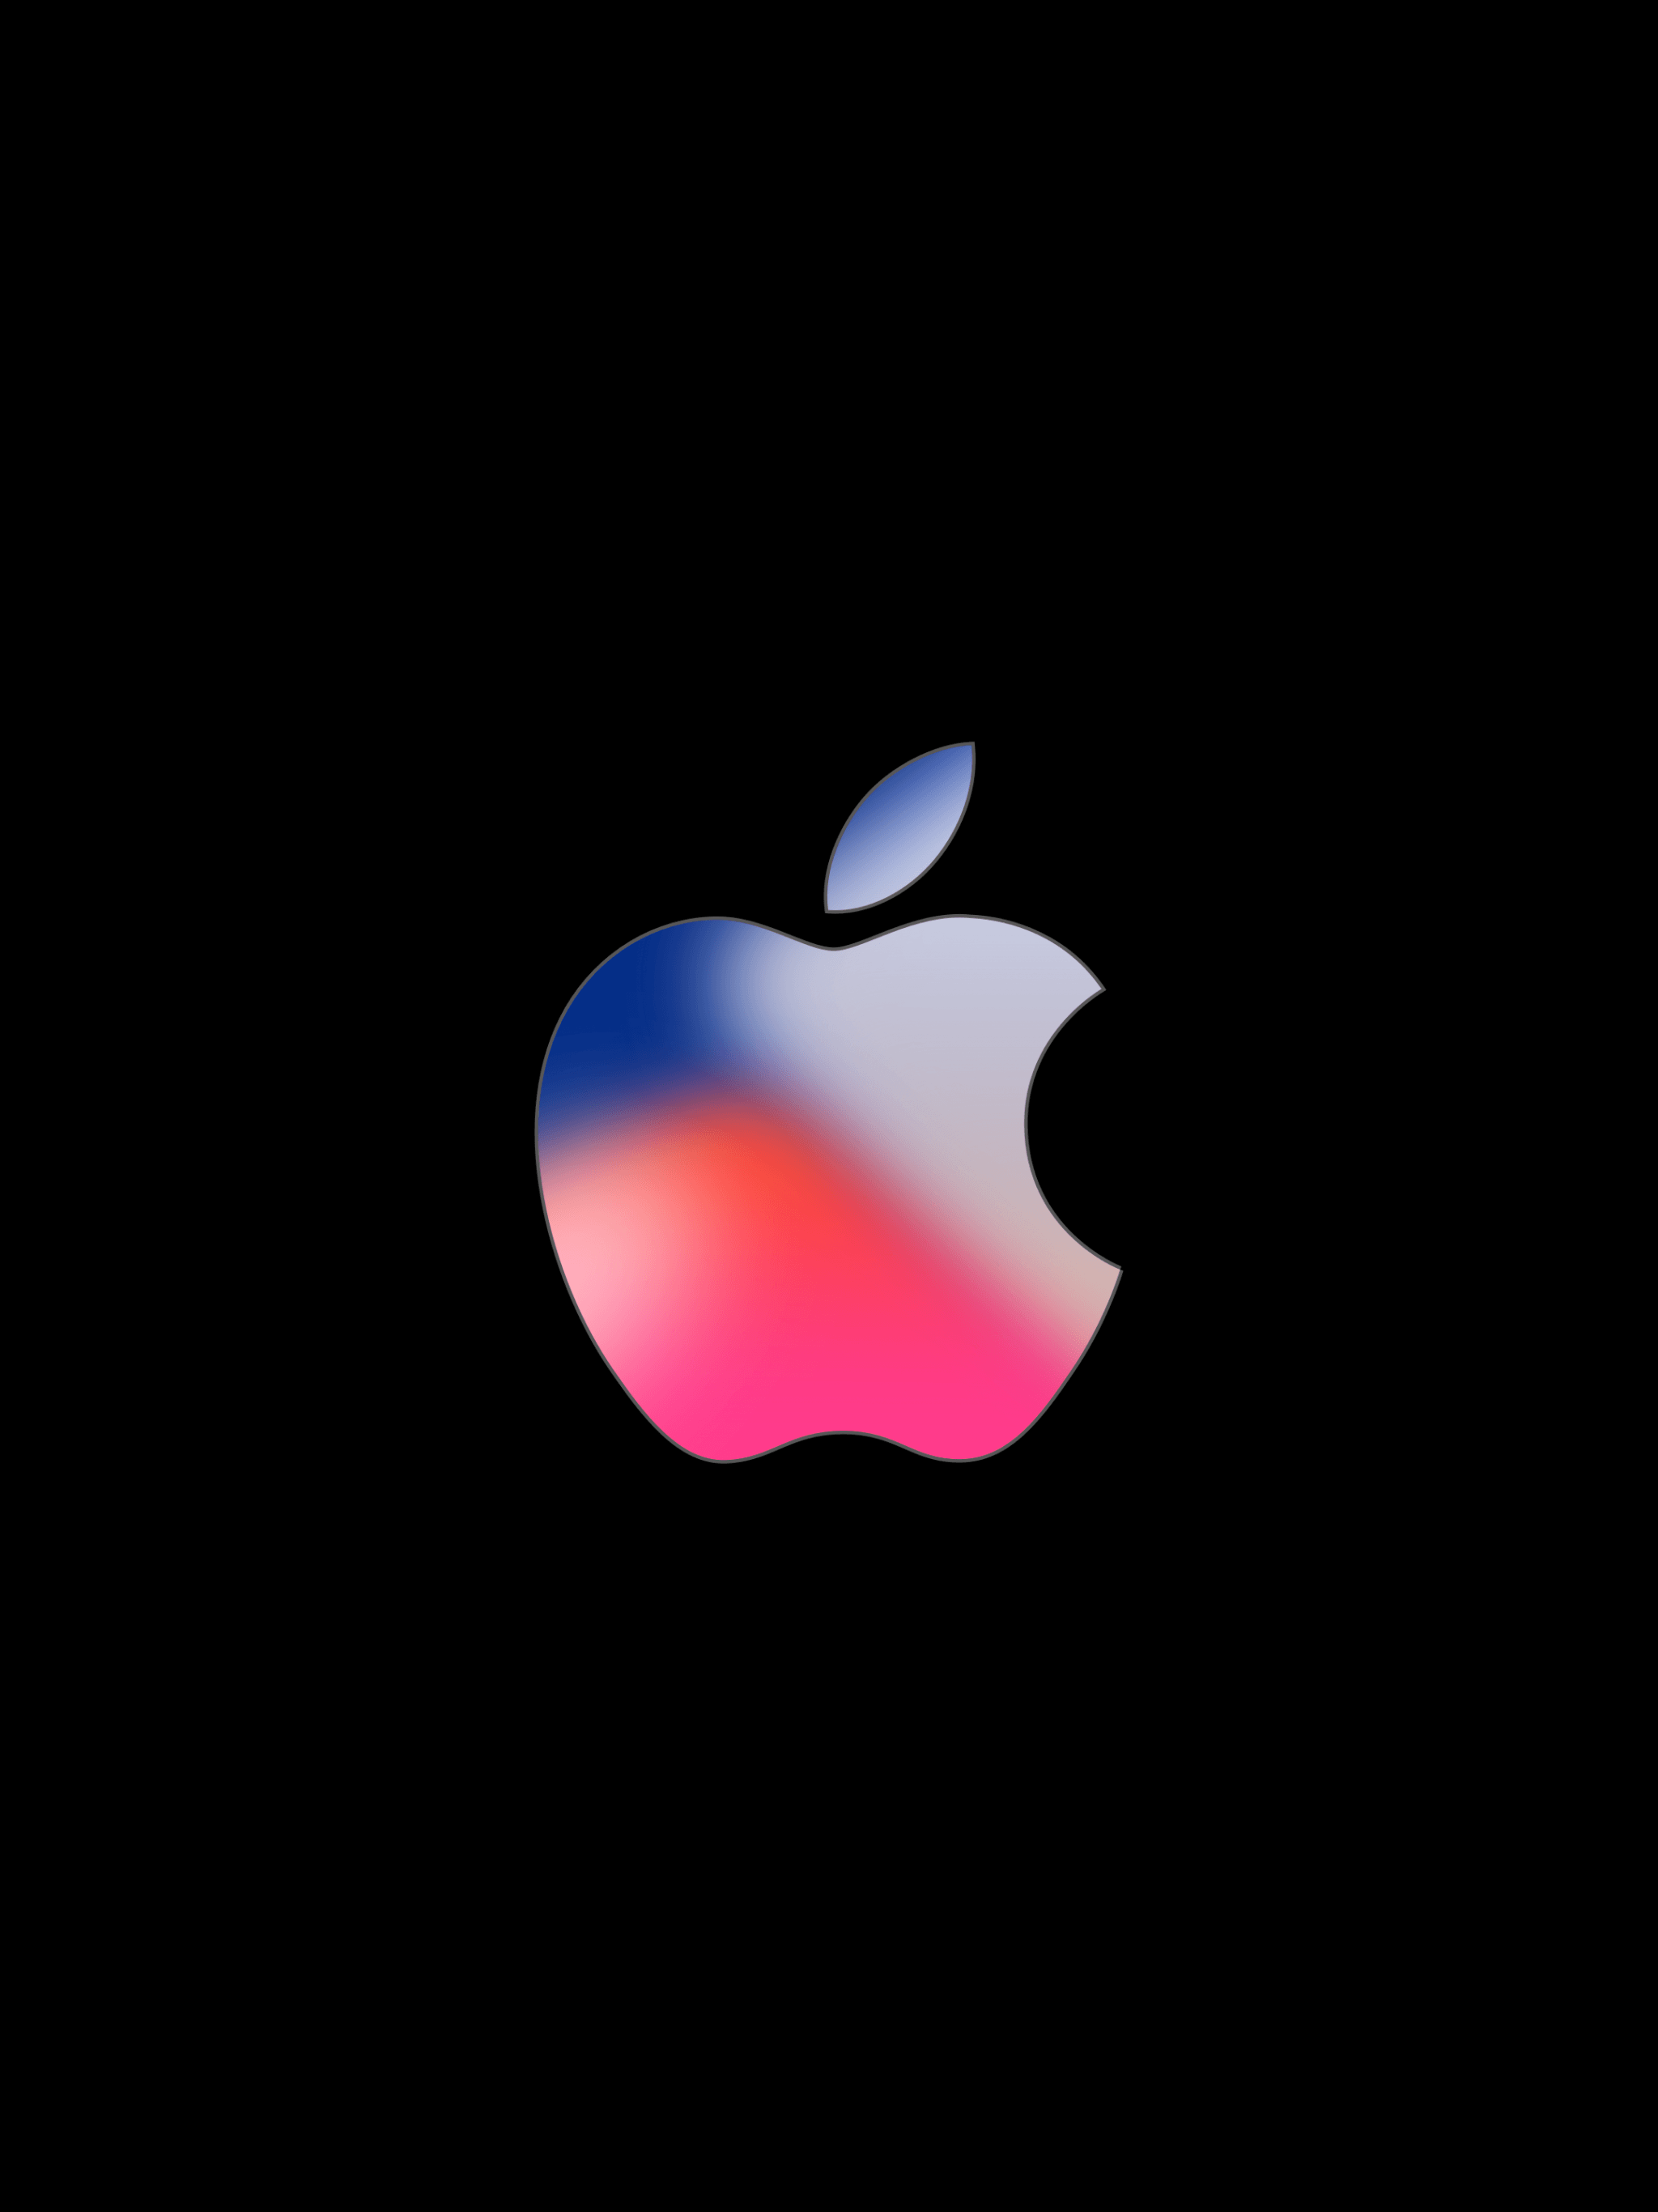 iPhone XR Official Wallpapers - Wallpaper Cave